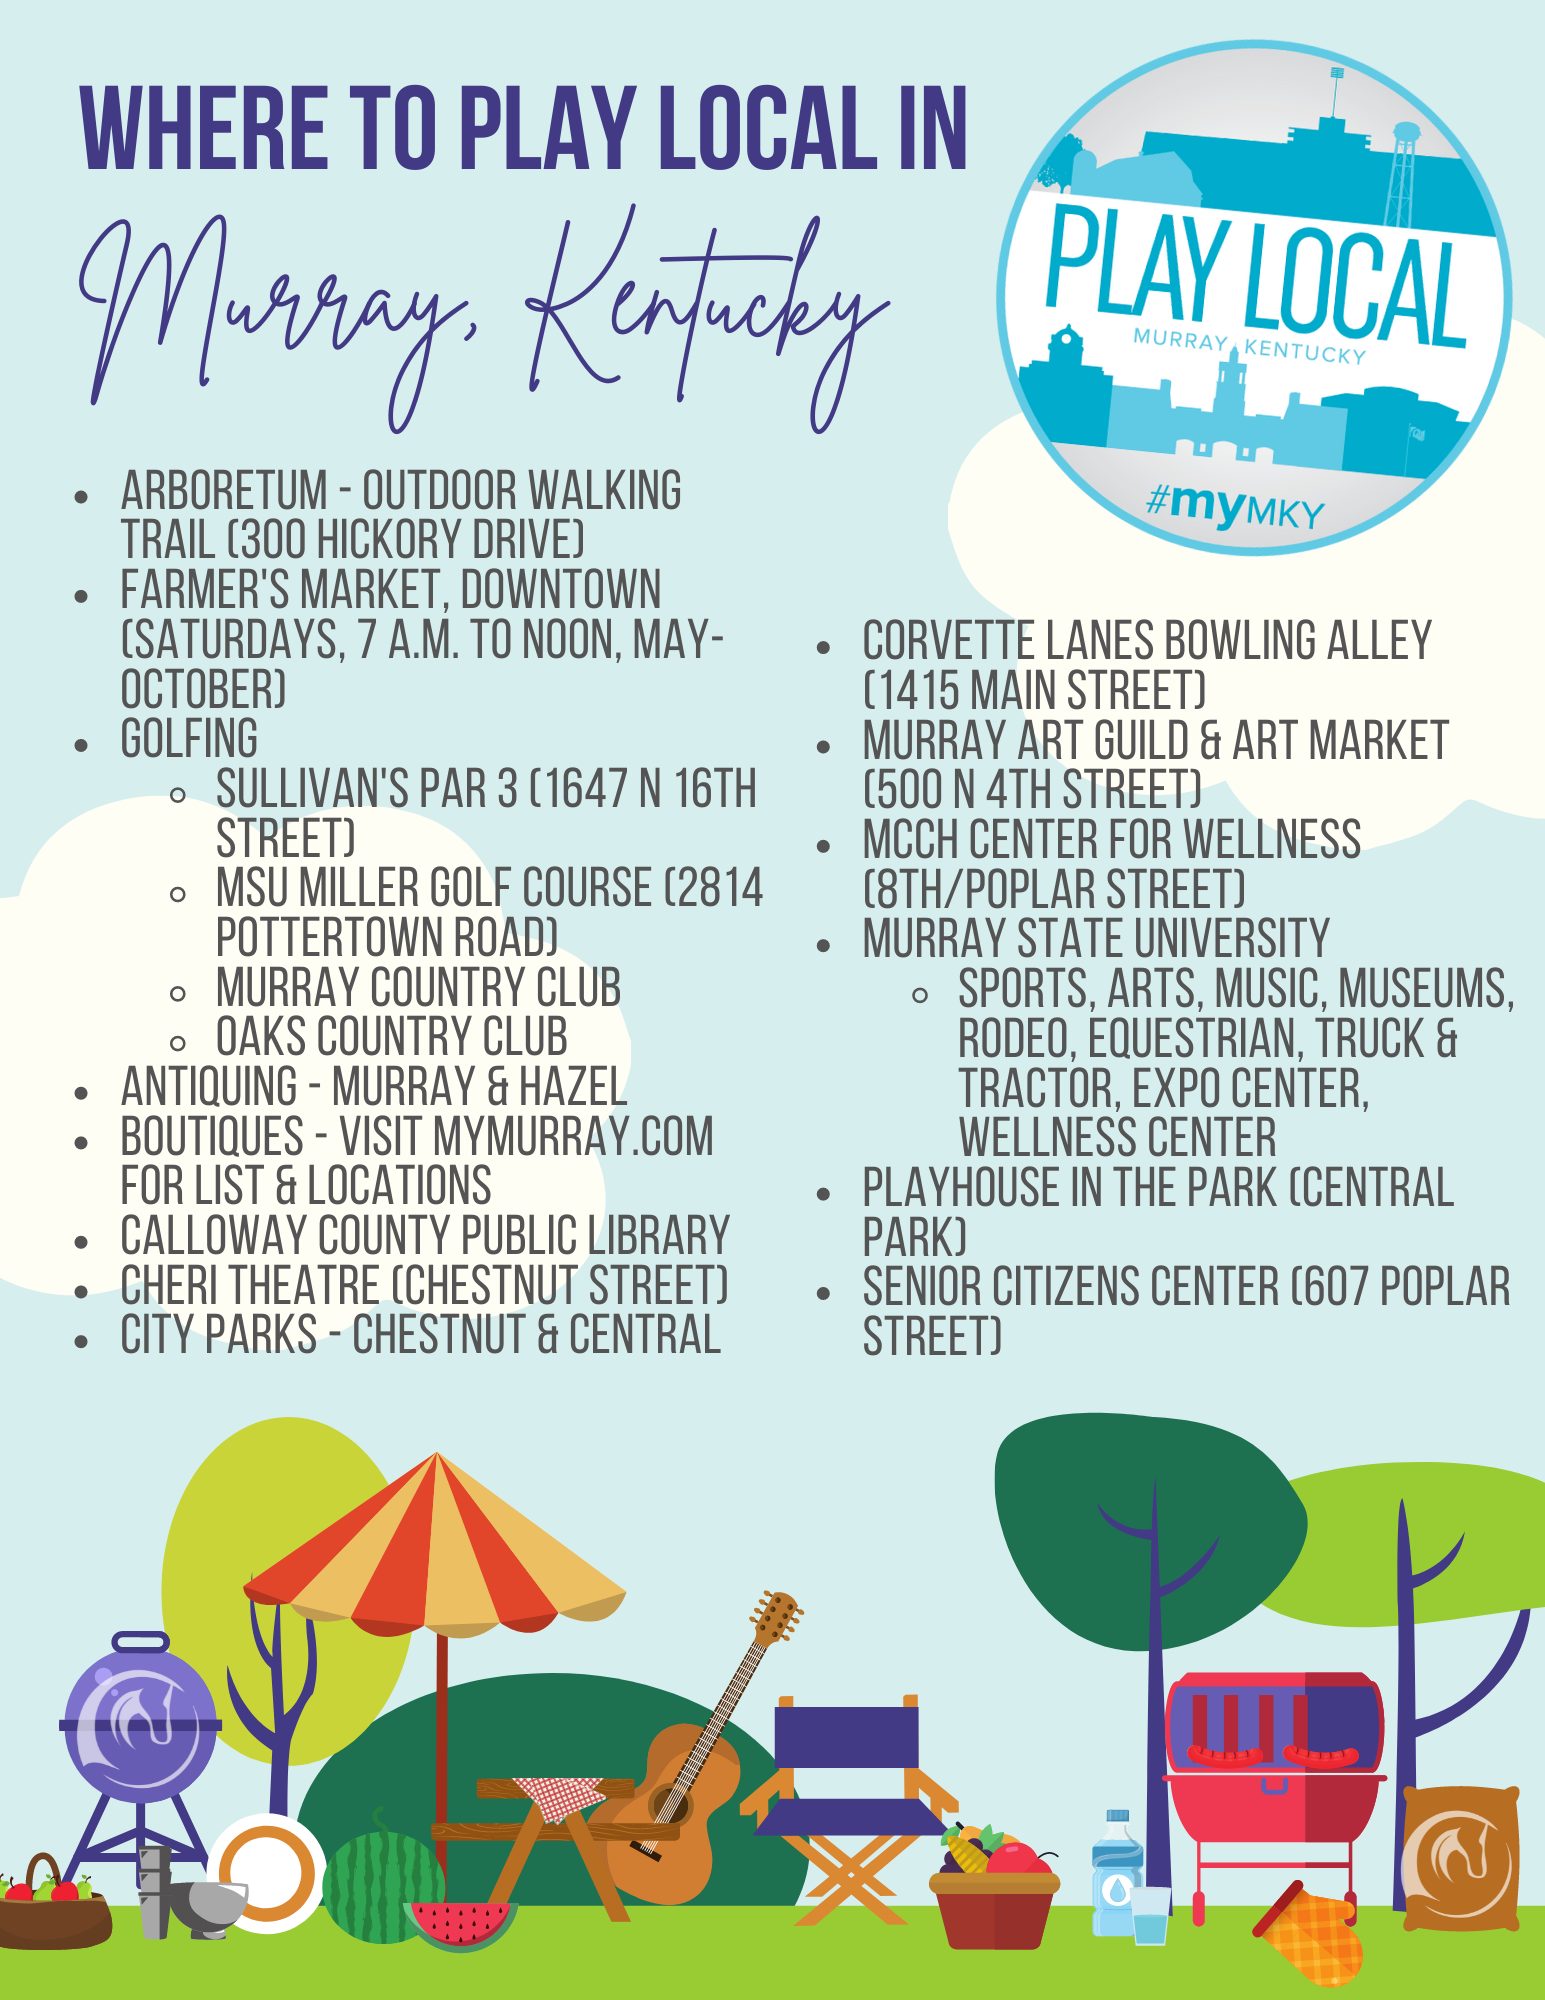 Where to Play Local in Murray, KY